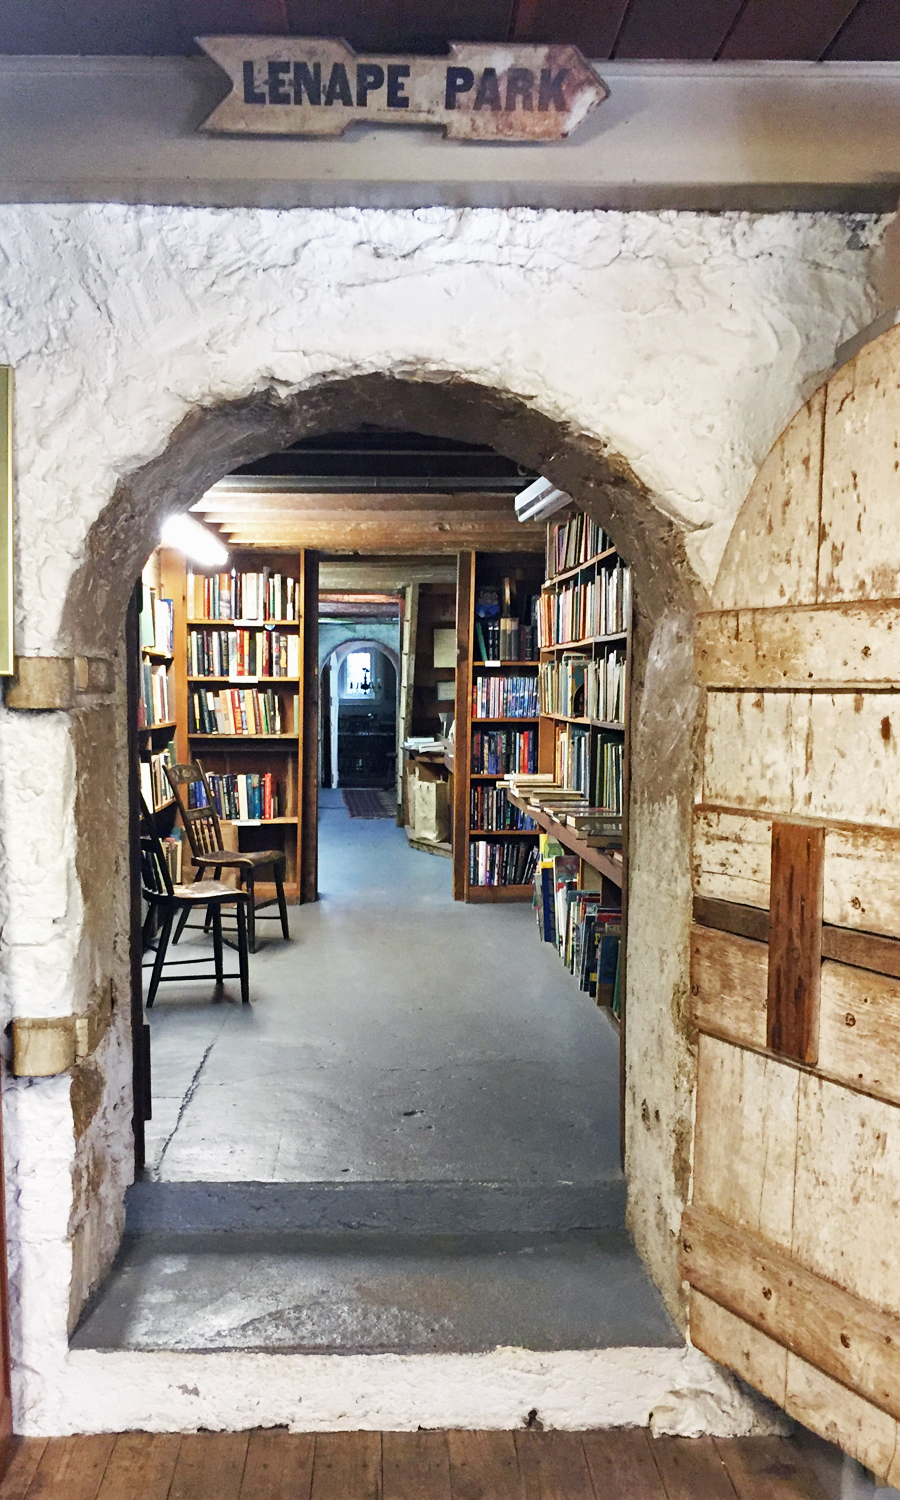 Room after room of books at Baldwin's Book Barn.